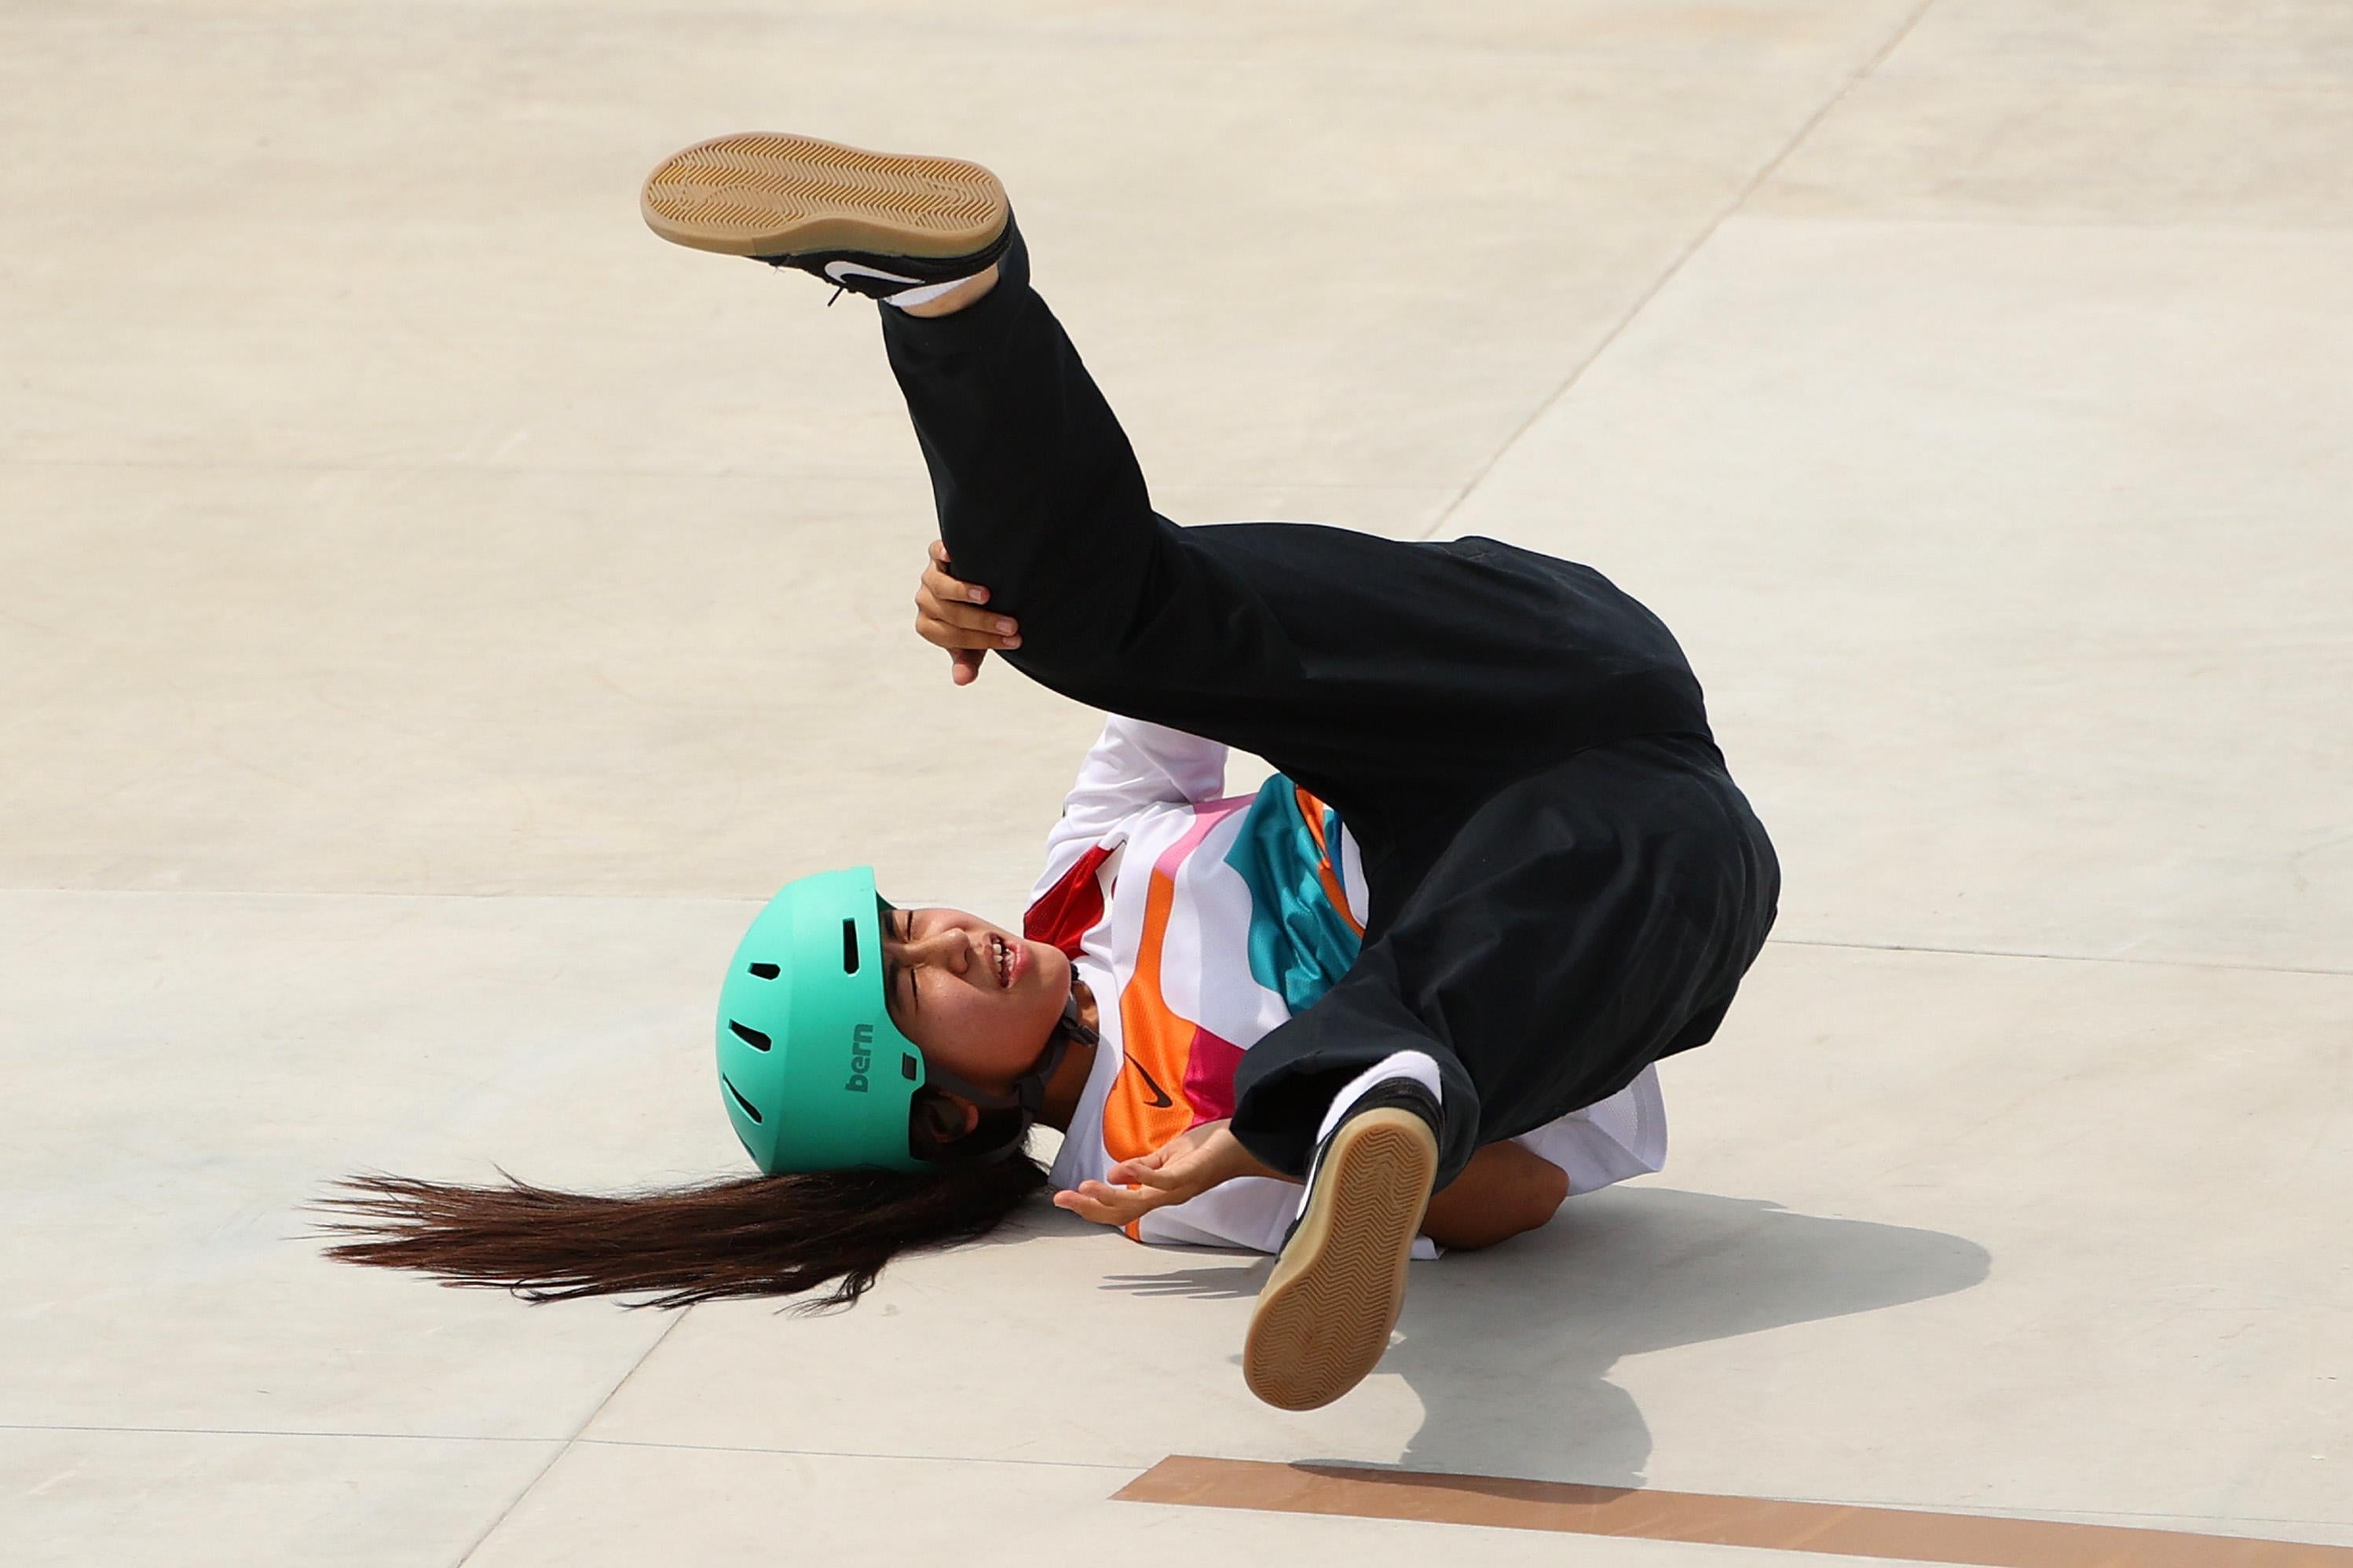 A girl in a teal helmet and long ponytail falling on her back, legs in the air, on concrete